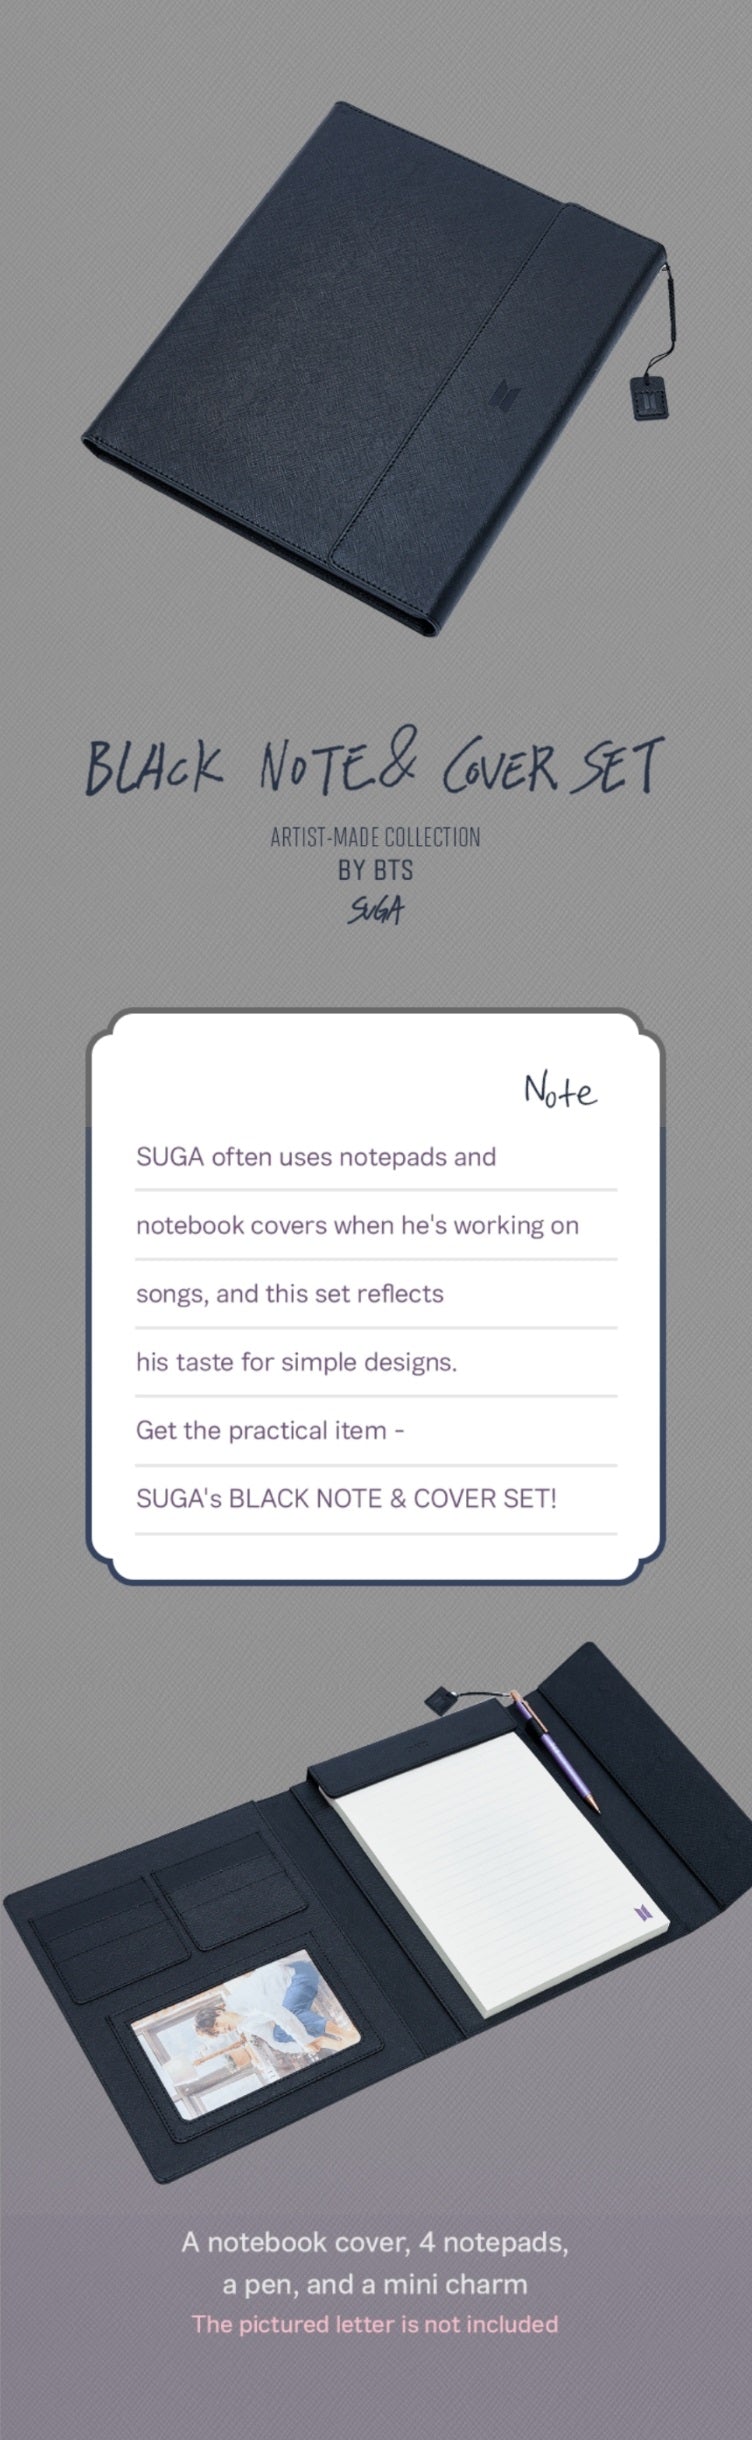 BTS x HYBE: ARTIST-MADE COLLECTION BY BTS SUGA